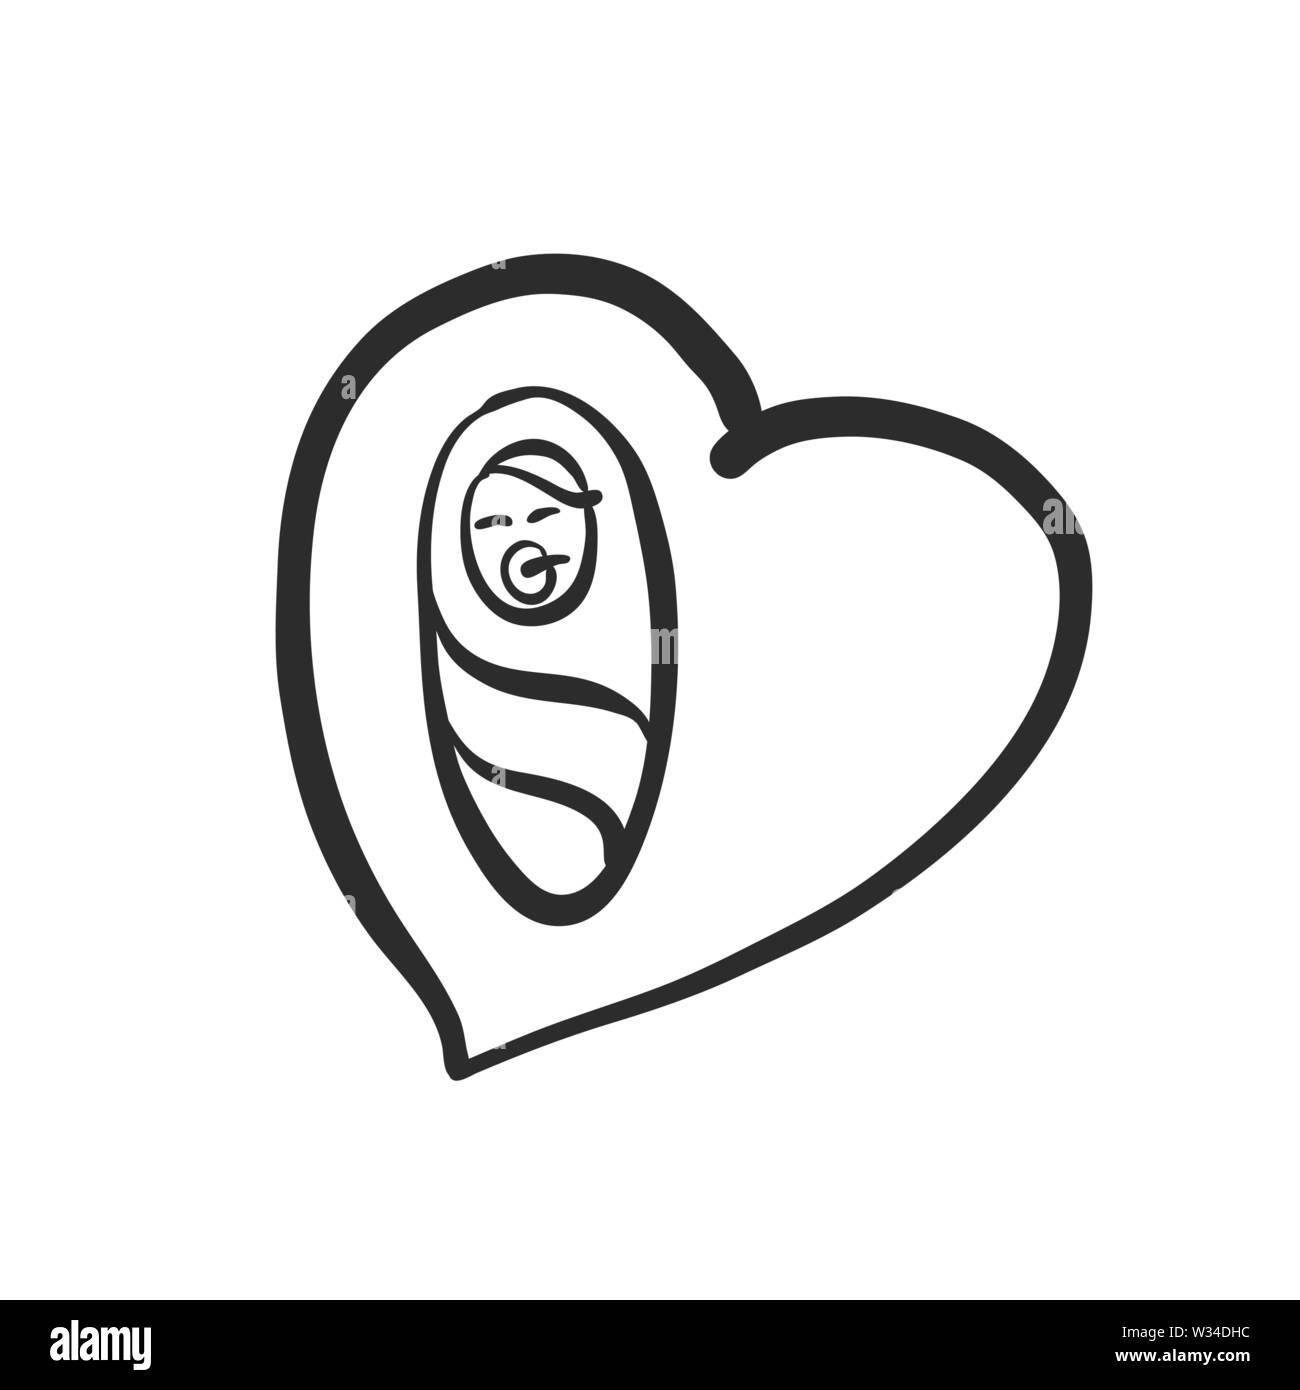 Newborn baby icon in heart. Hand-drawn logo symbol for t-shirt prints and online marketing. Stock Vector